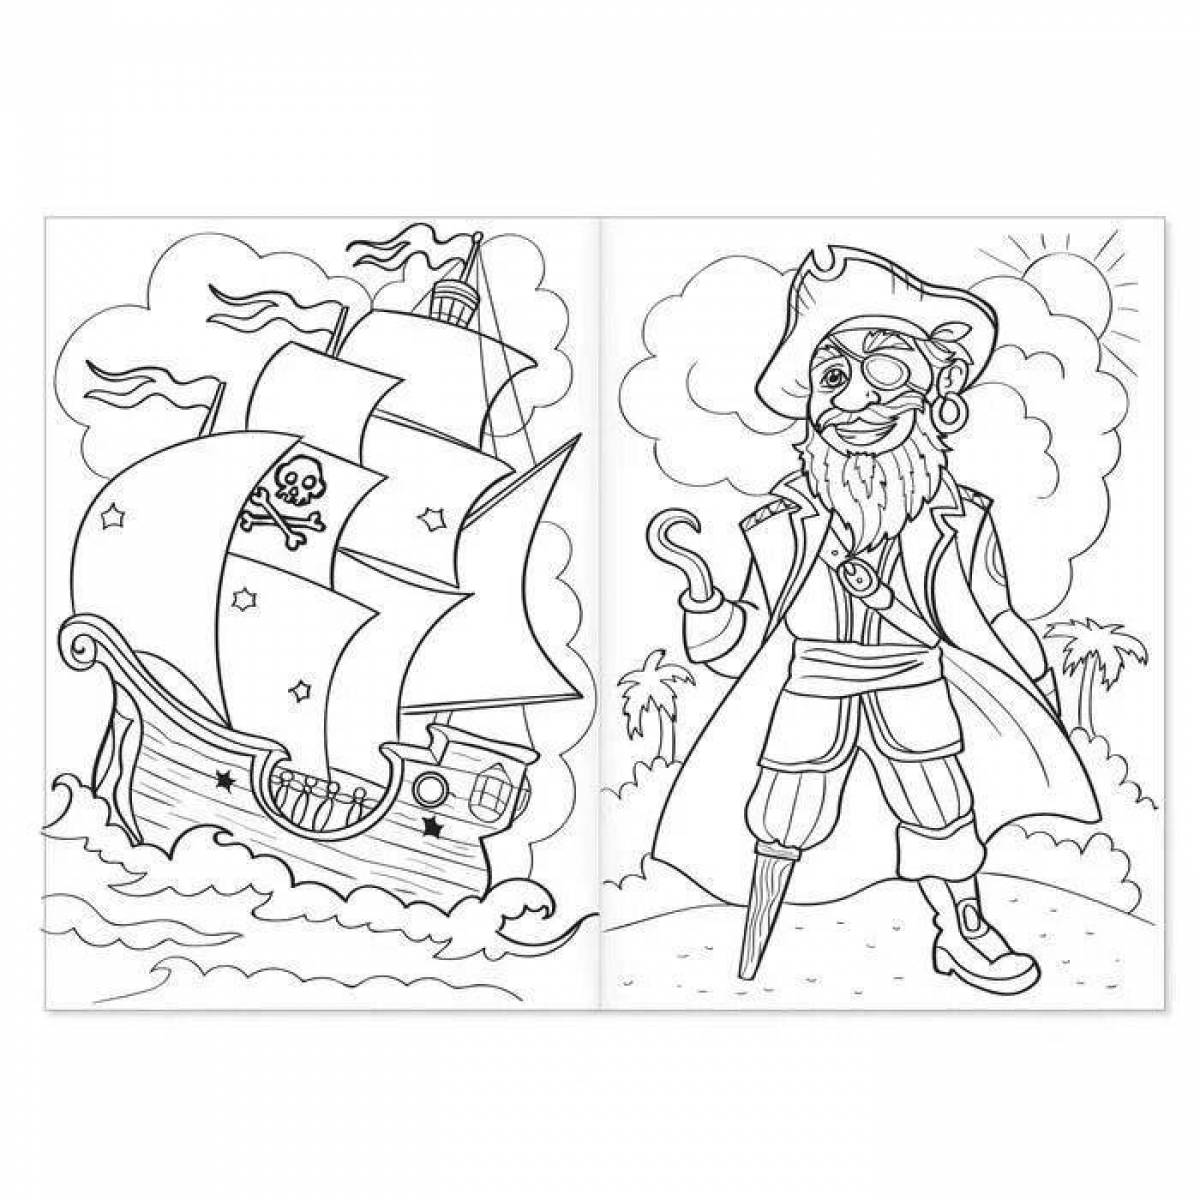 Colorful pirate coloring page